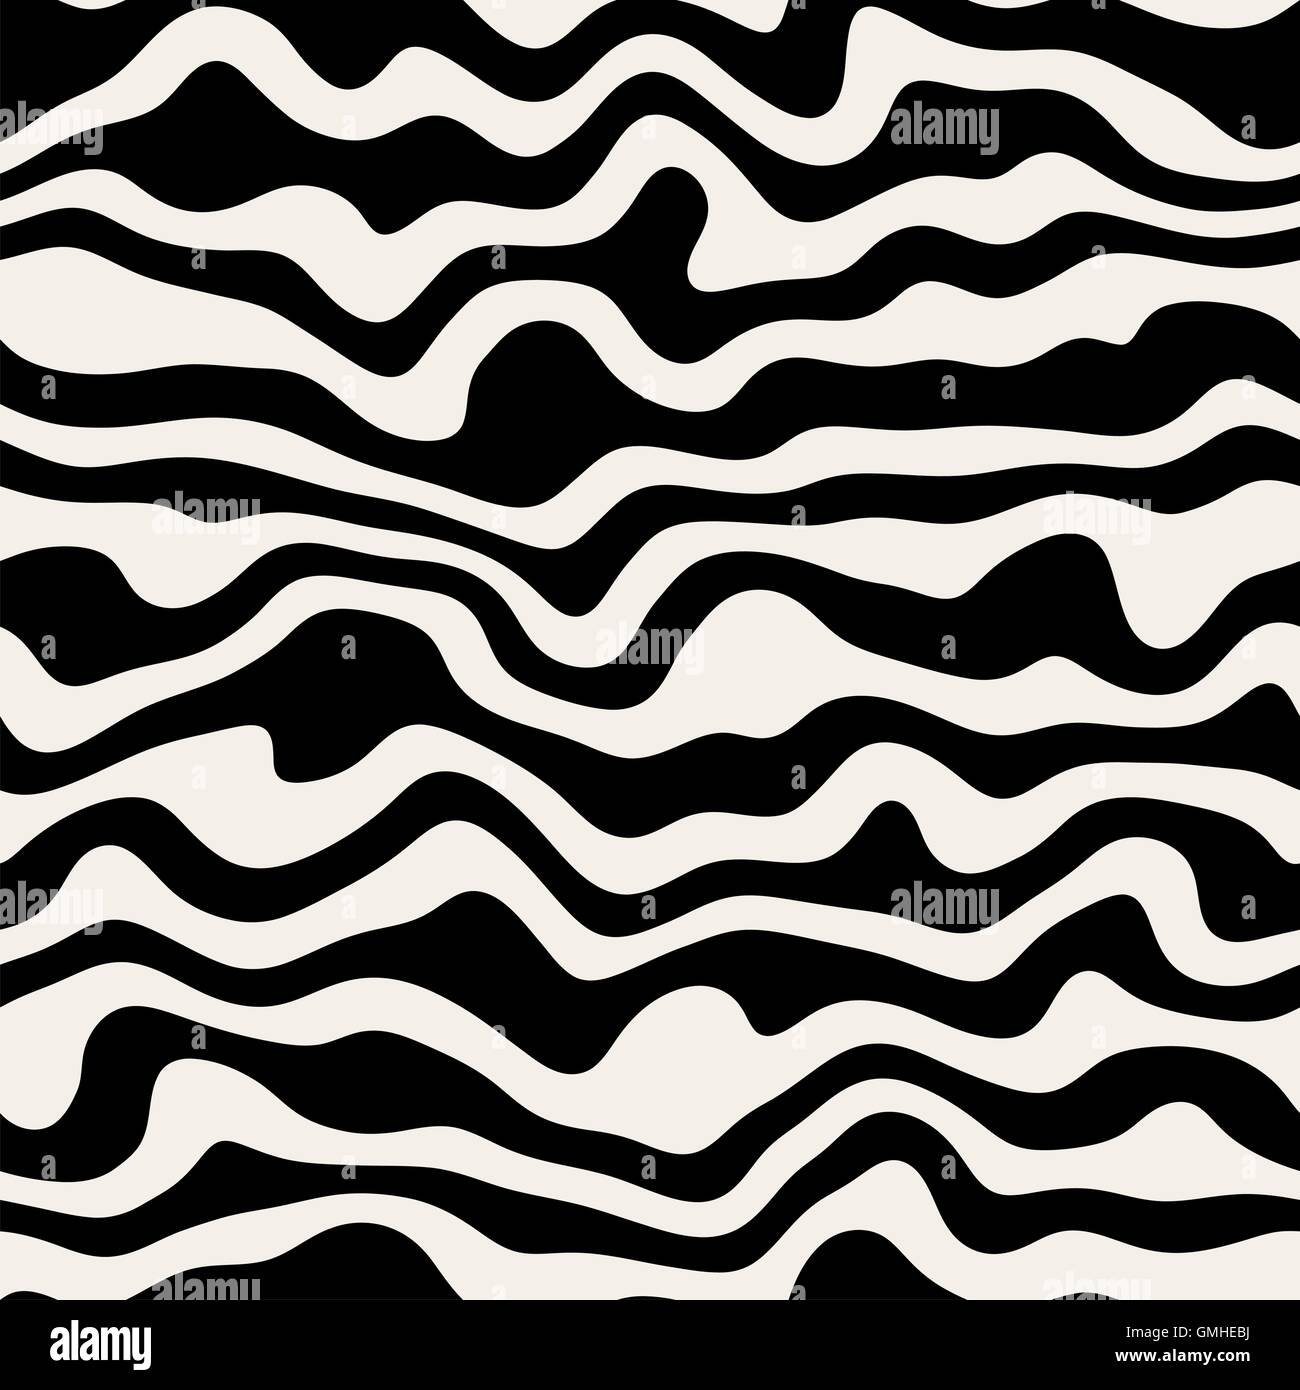 Vector Seamless Black & White Wavy Distorted Lines Pattern Stock Vector